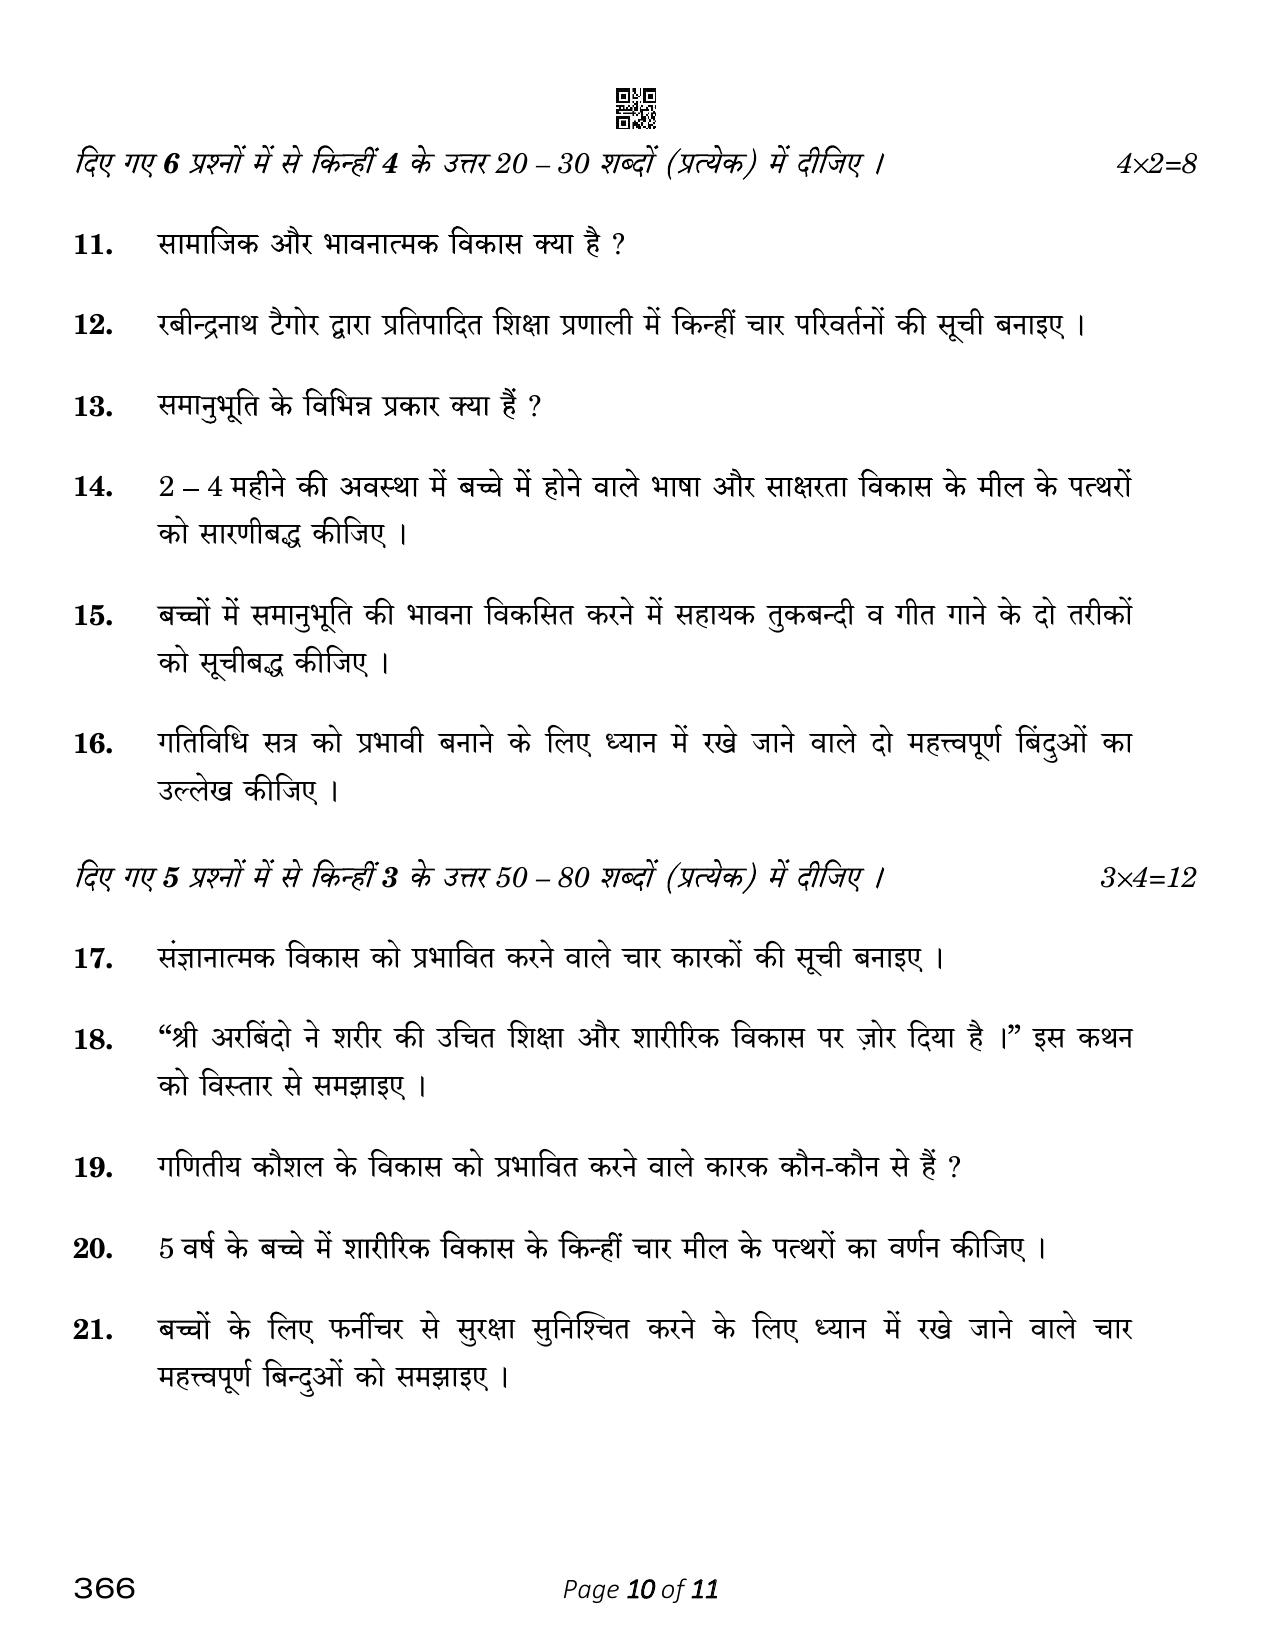 CBSE Class 12 Early Childhood Care & Education (Compartment) 2023 Question Paper - Page 10